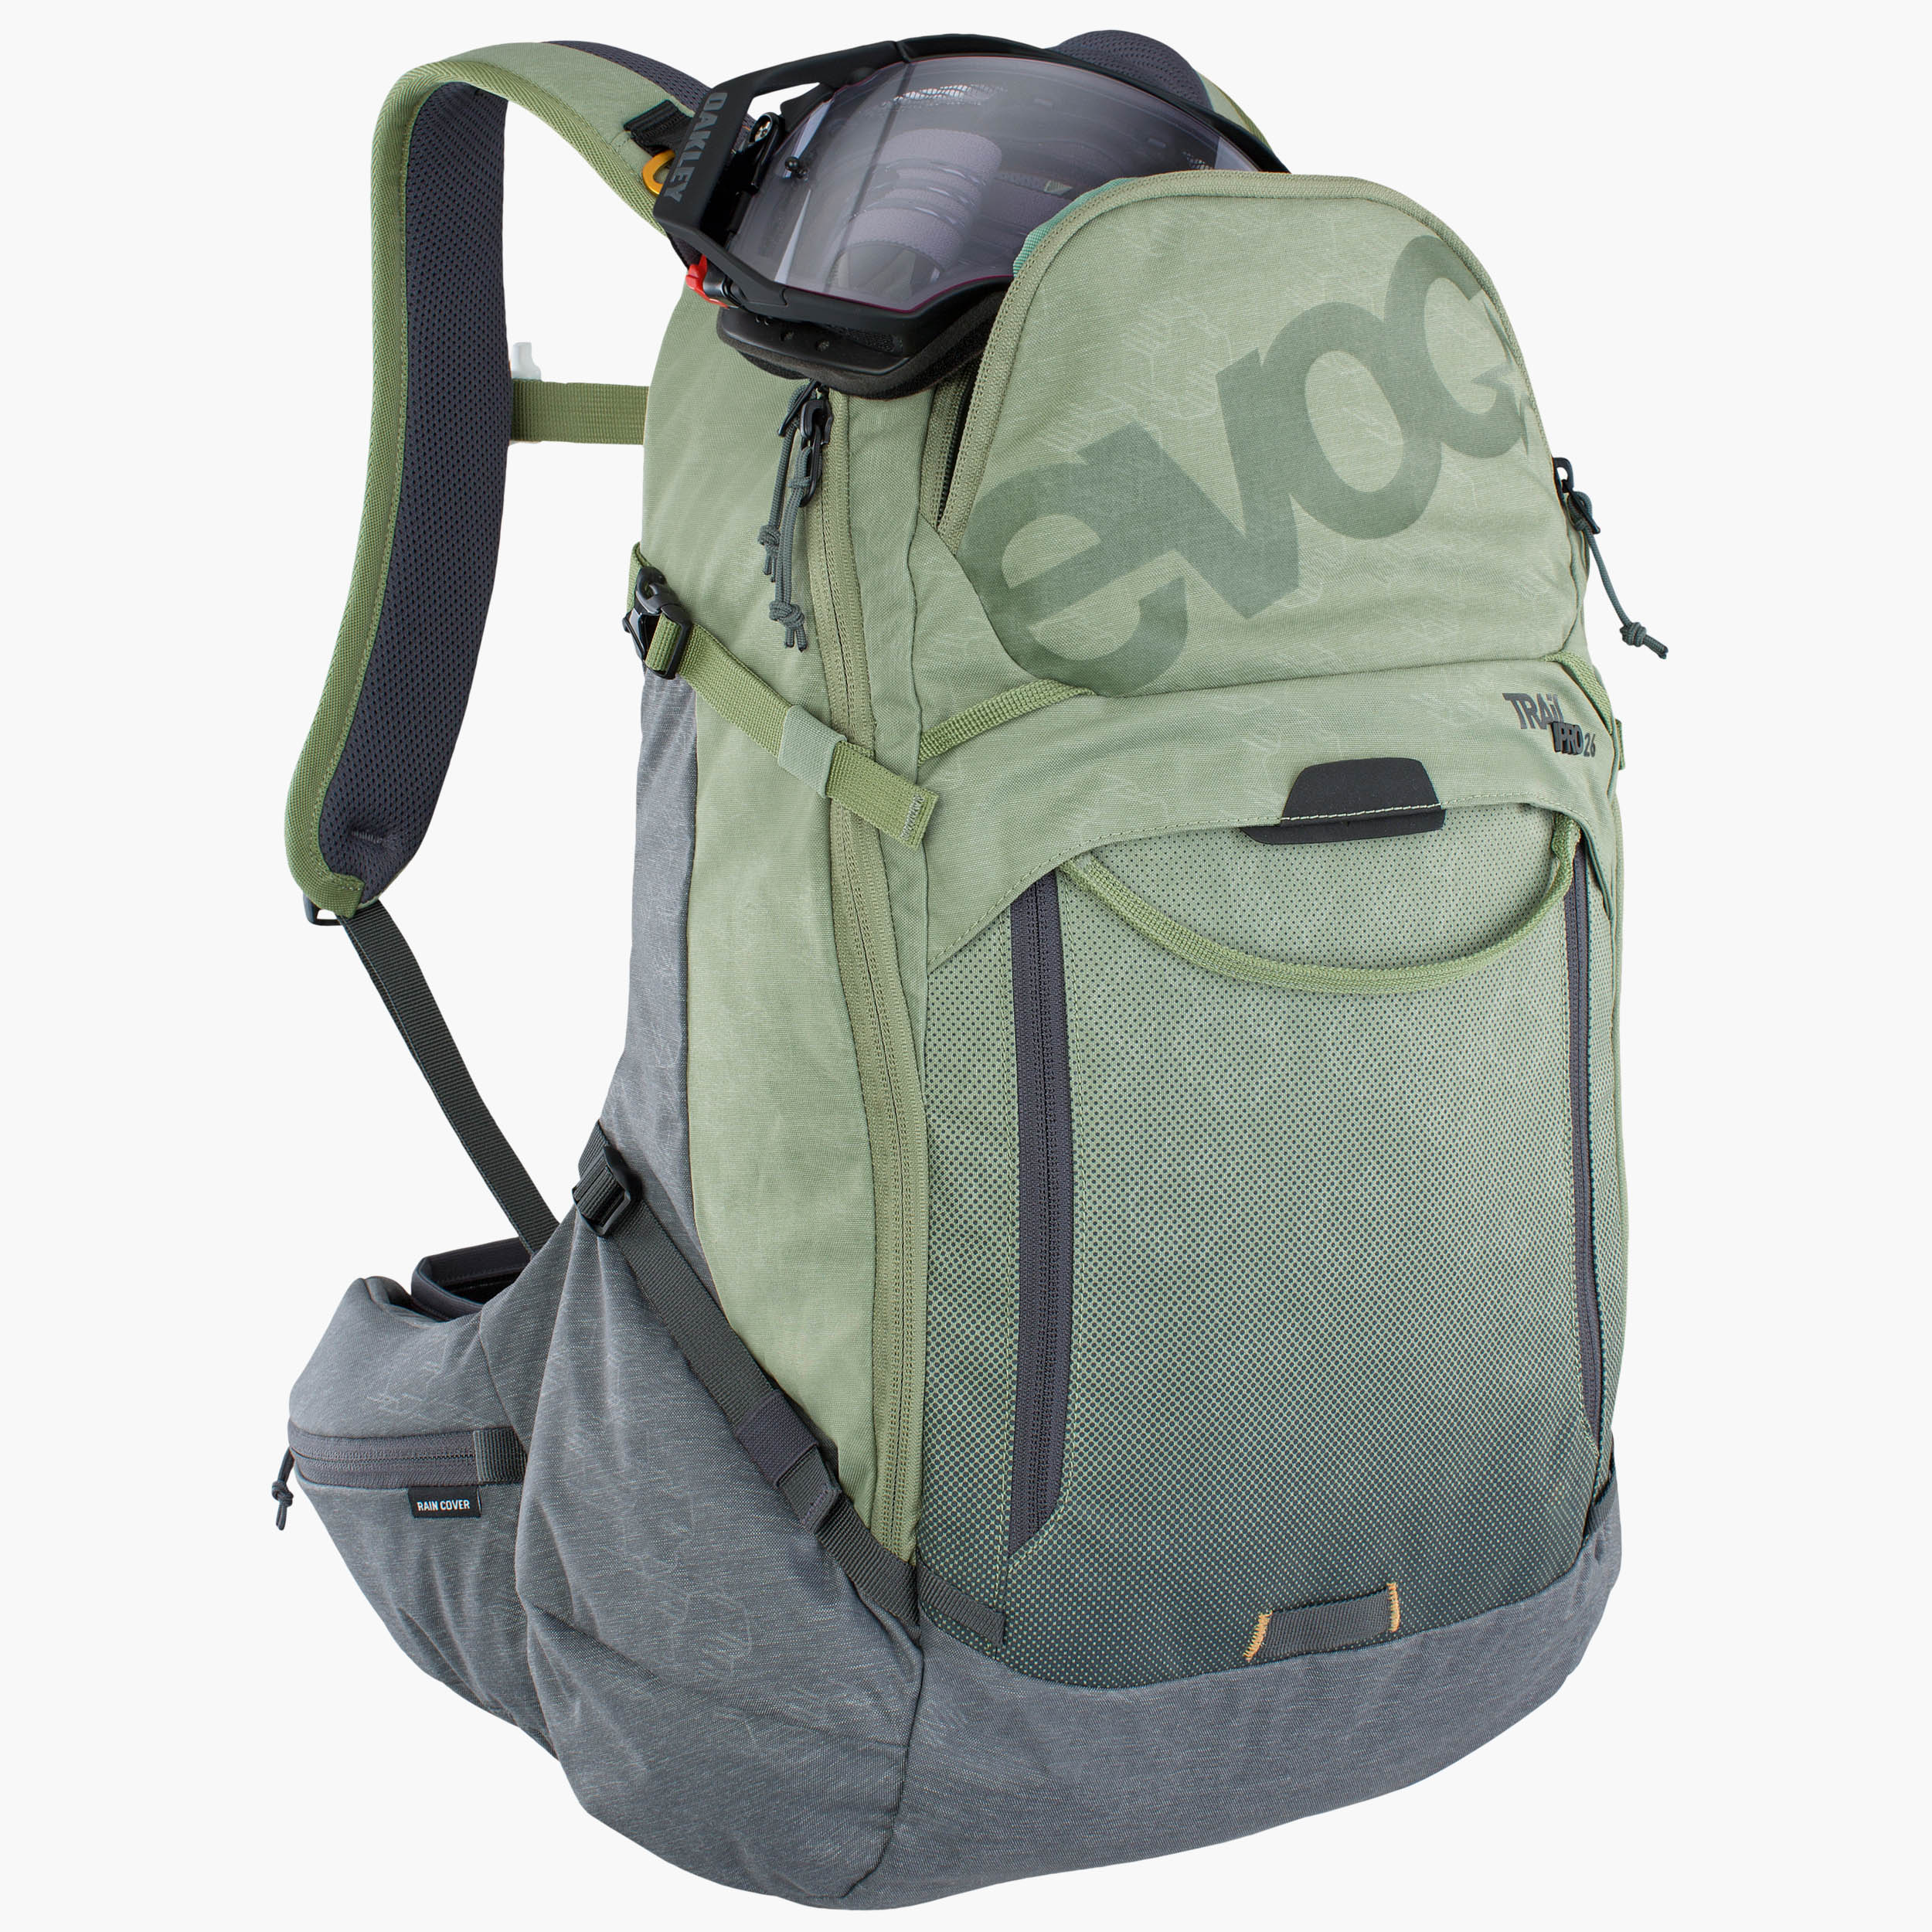 Octrooi kwaadaardig houding TRAIL PRO 26 - Colour: Light Olive - Carbon Grey | Size: S/M | Volume: 26 l